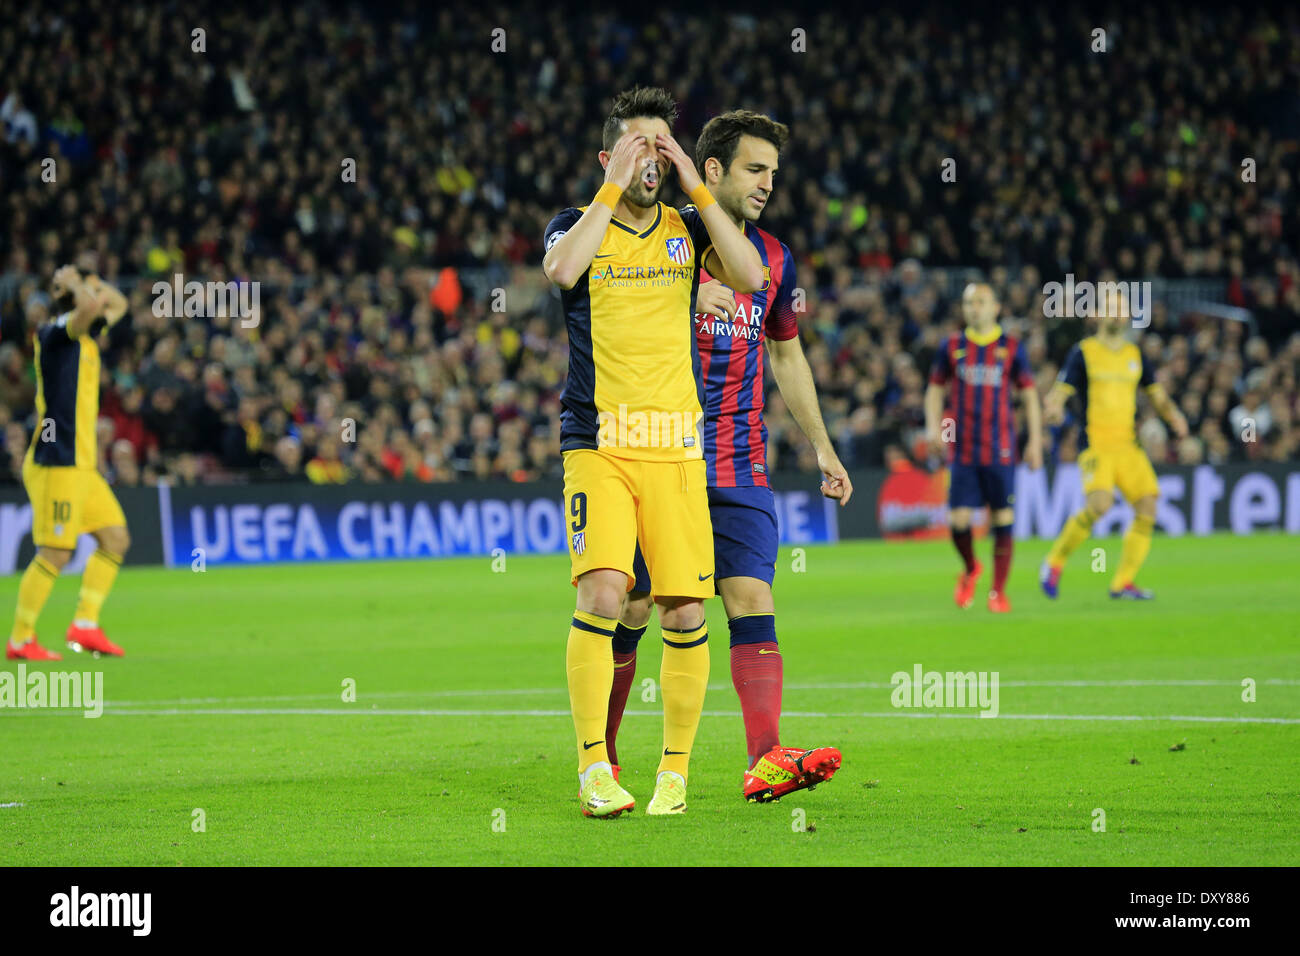 Barcelona, Spain. 1st Apr, 2014. David Villa in the match between FC  Barcelona and Atletico de Madrid for the first leg of the quarterfinals  round of the Champions League at the Camp